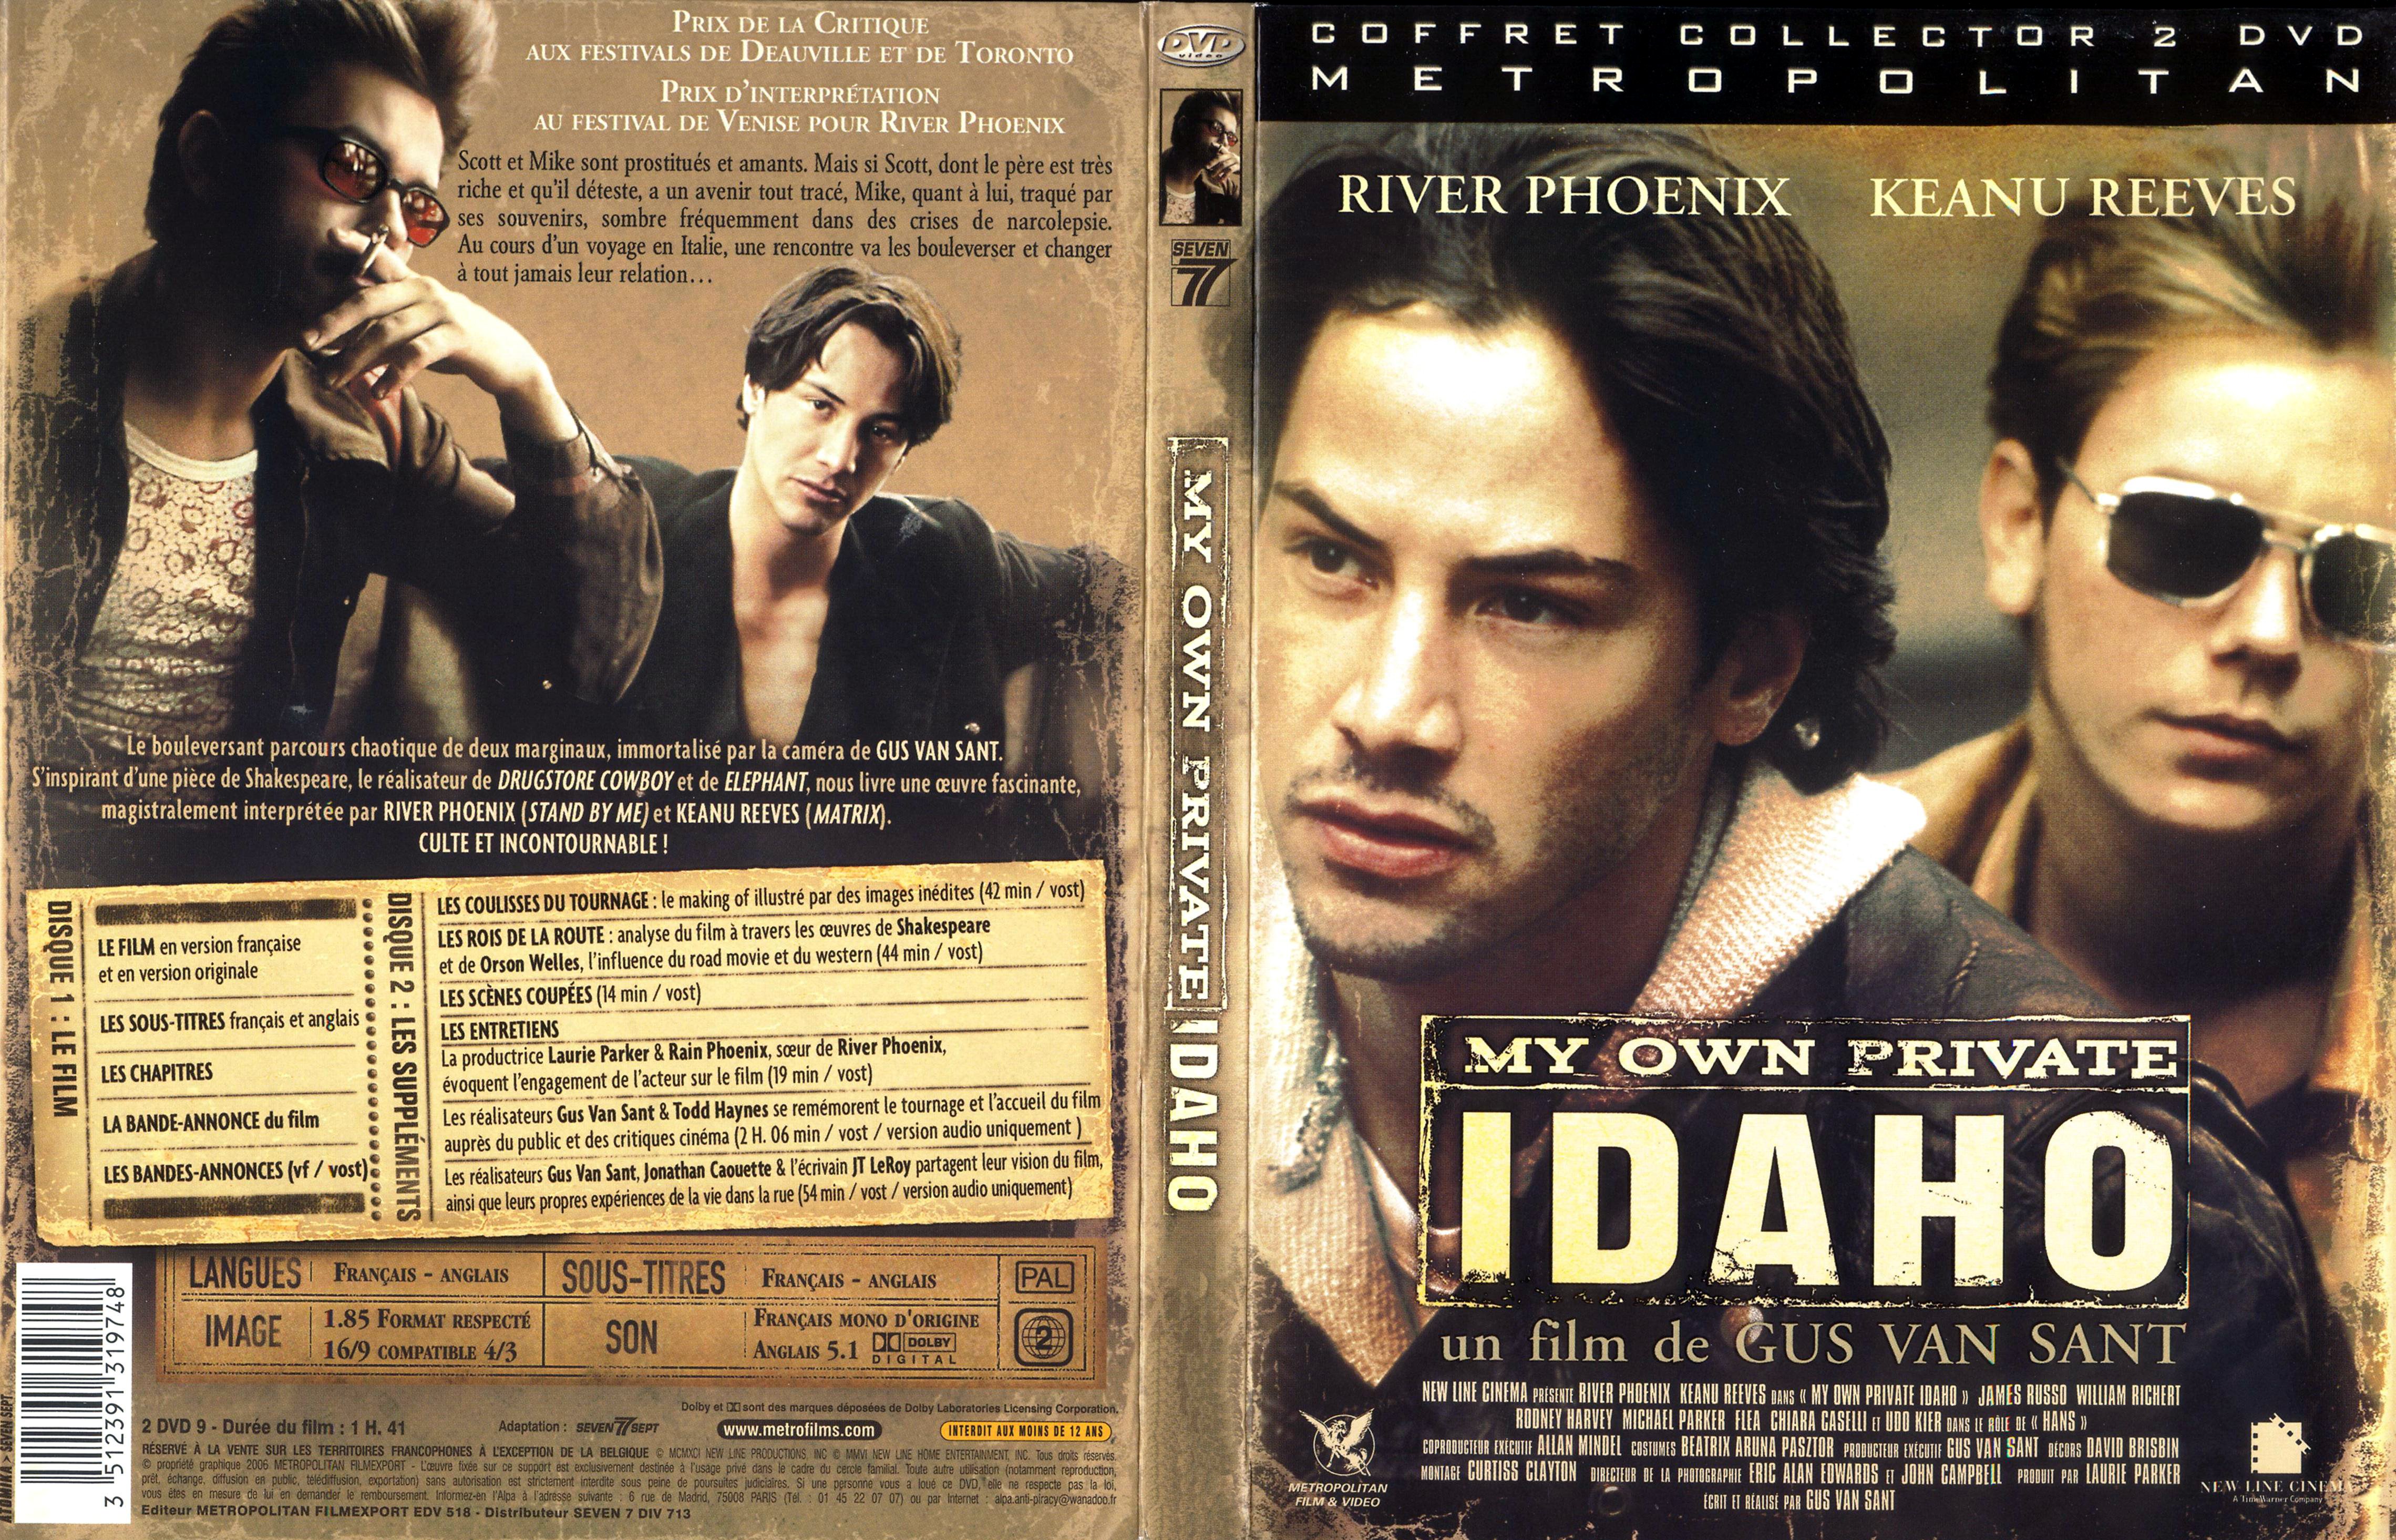 Jaquette DVD My own private Idaho v2